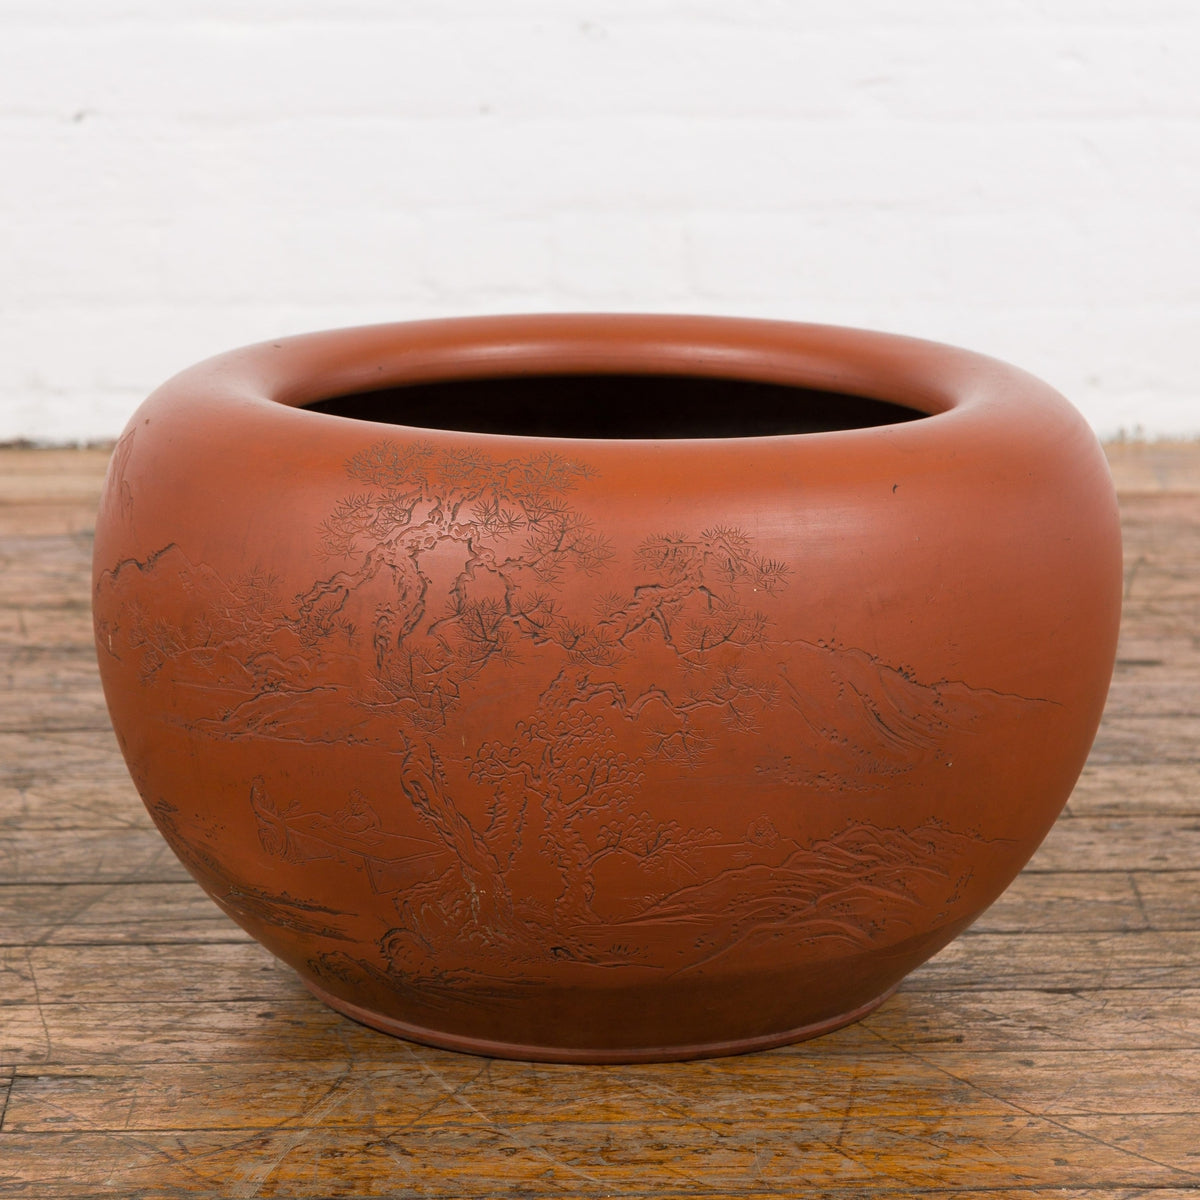 Orange Circular Antique Planter with Etched Design-YN7819-3. Asian & Chinese Furniture, Art, Antiques, Vintage Home Décor for sale at FEA Home